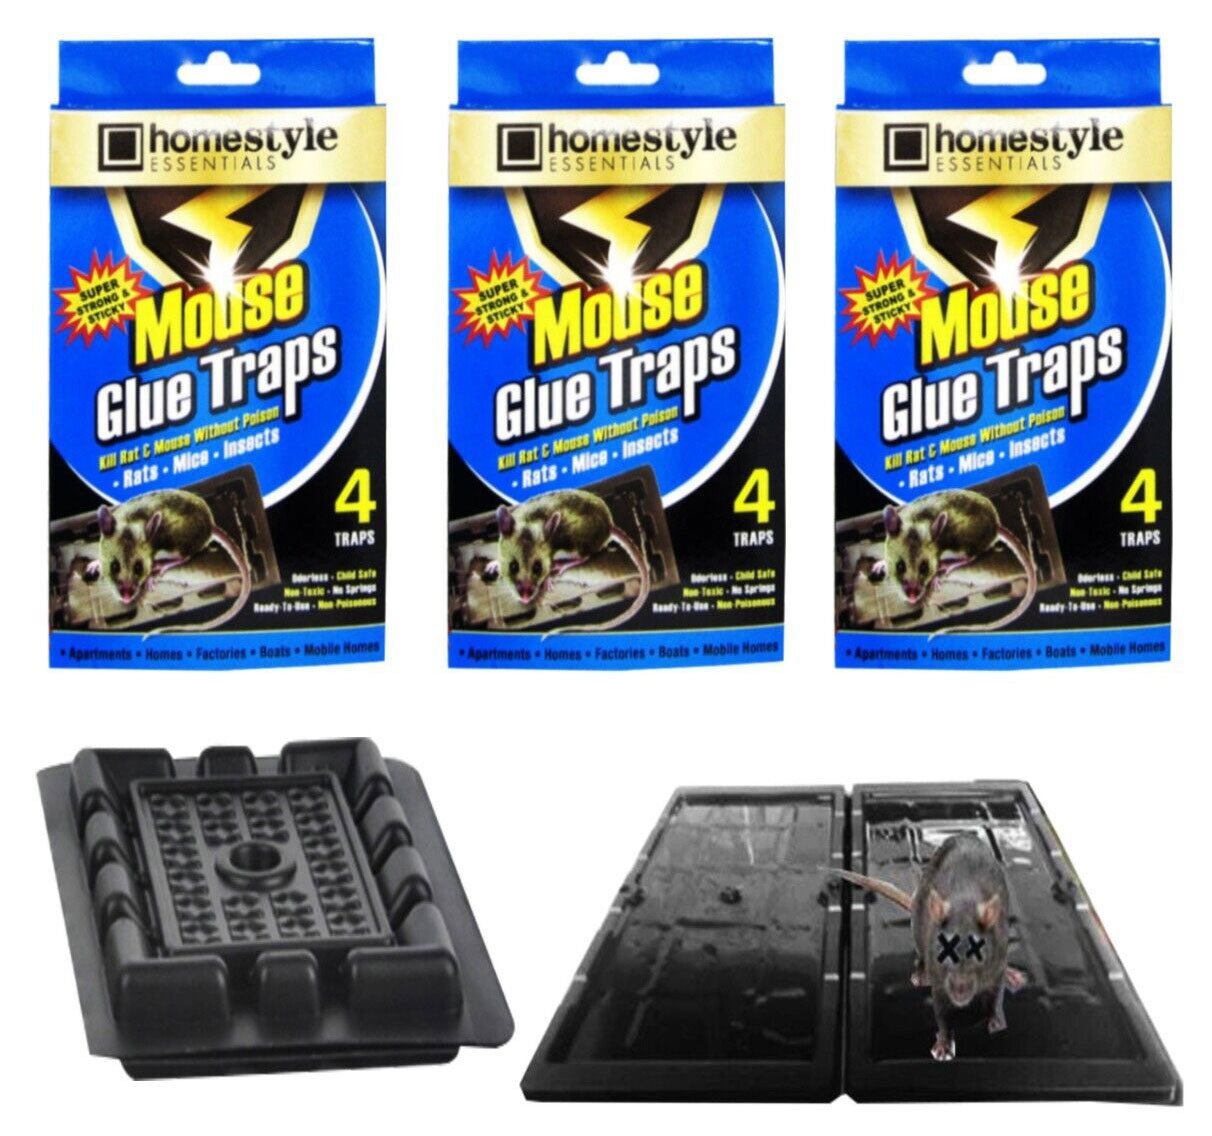 Homestyle Essentials Super Strong & Sticky Jumbo Mouse Glue Traps